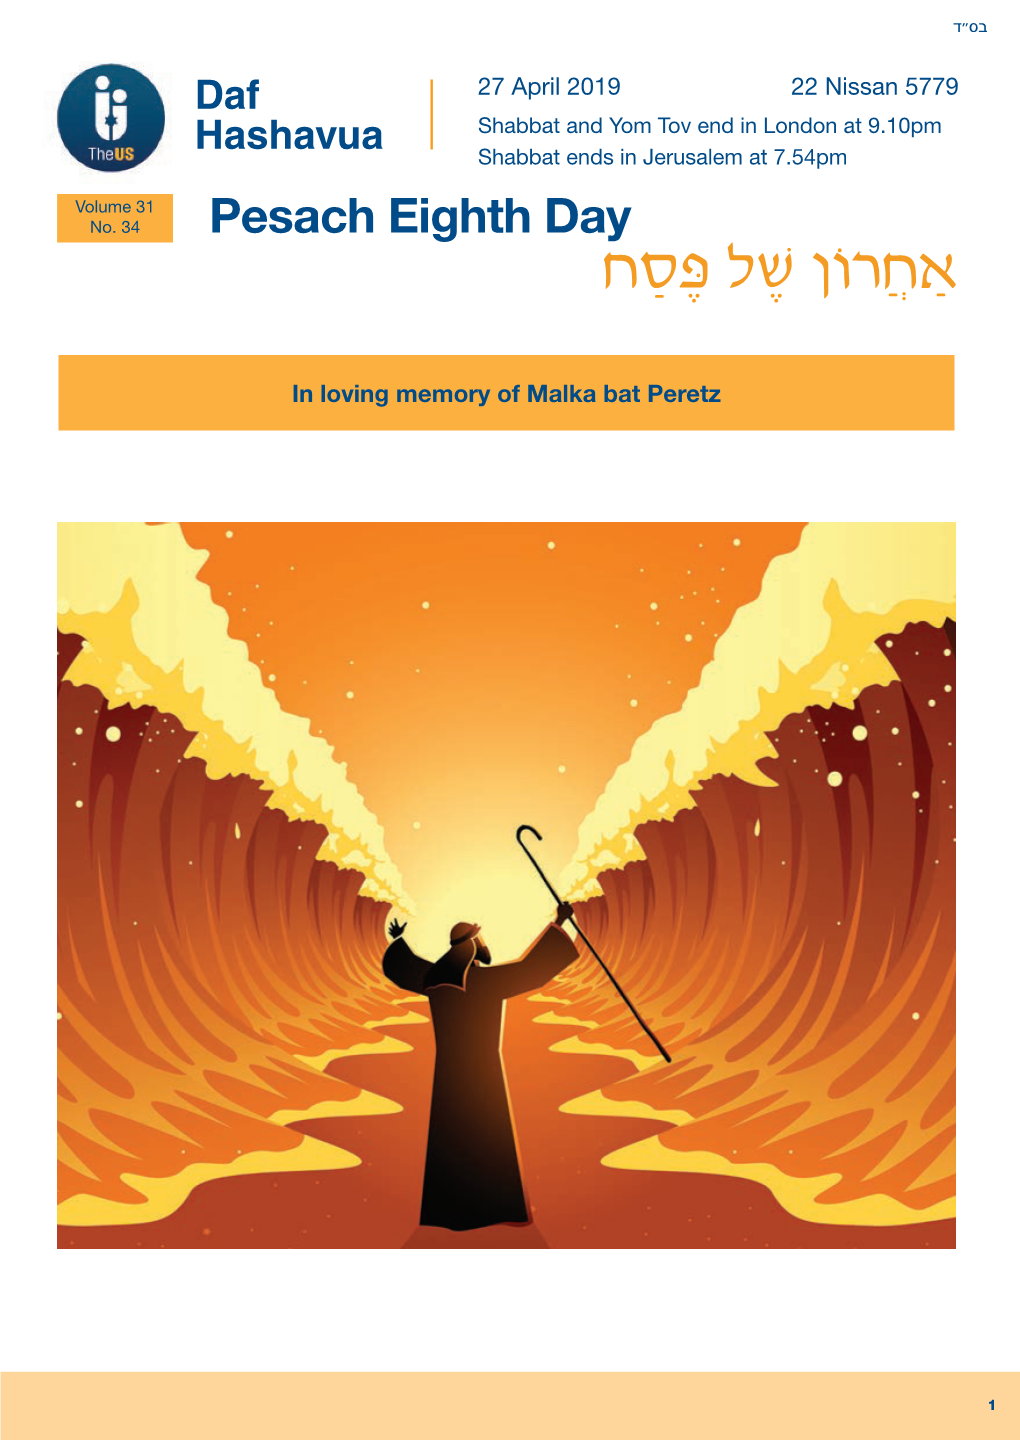 Pesach Eighth Day